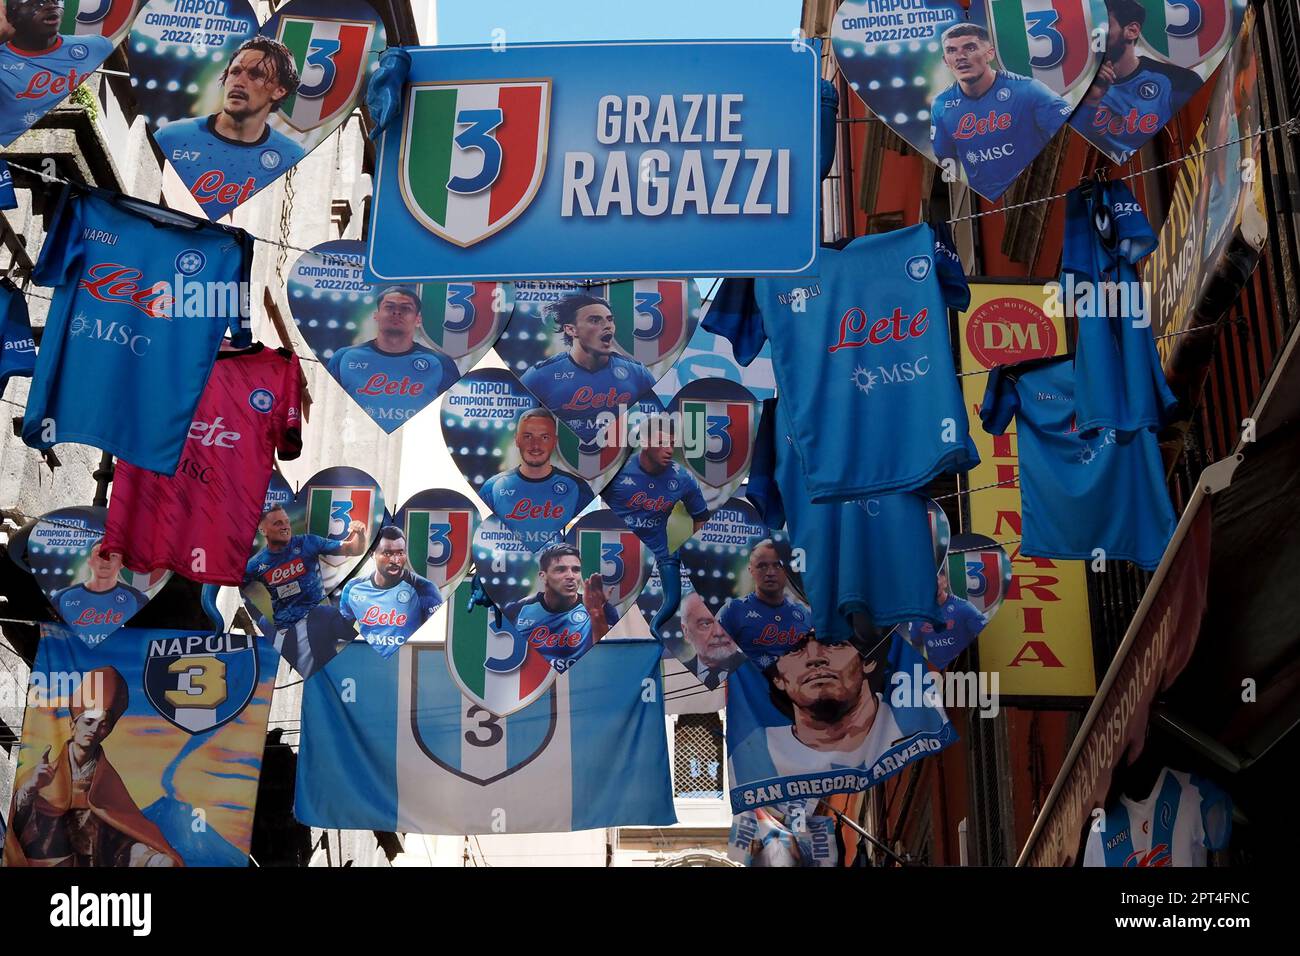 Napoli, Italy. 27th Apr, 2023. Flags and banners in honor of Napoli displayed in the alleys of Forcella, during the preparations for the celebration of the victory of the Italian Serie A championship and the third scudetto 'shield with the colors of the Italian flag, which is worn on the game uniform by the team that won the championship in the previous season'. Credit: Vincenzo Izzo/Alamy Live News Stock Photo